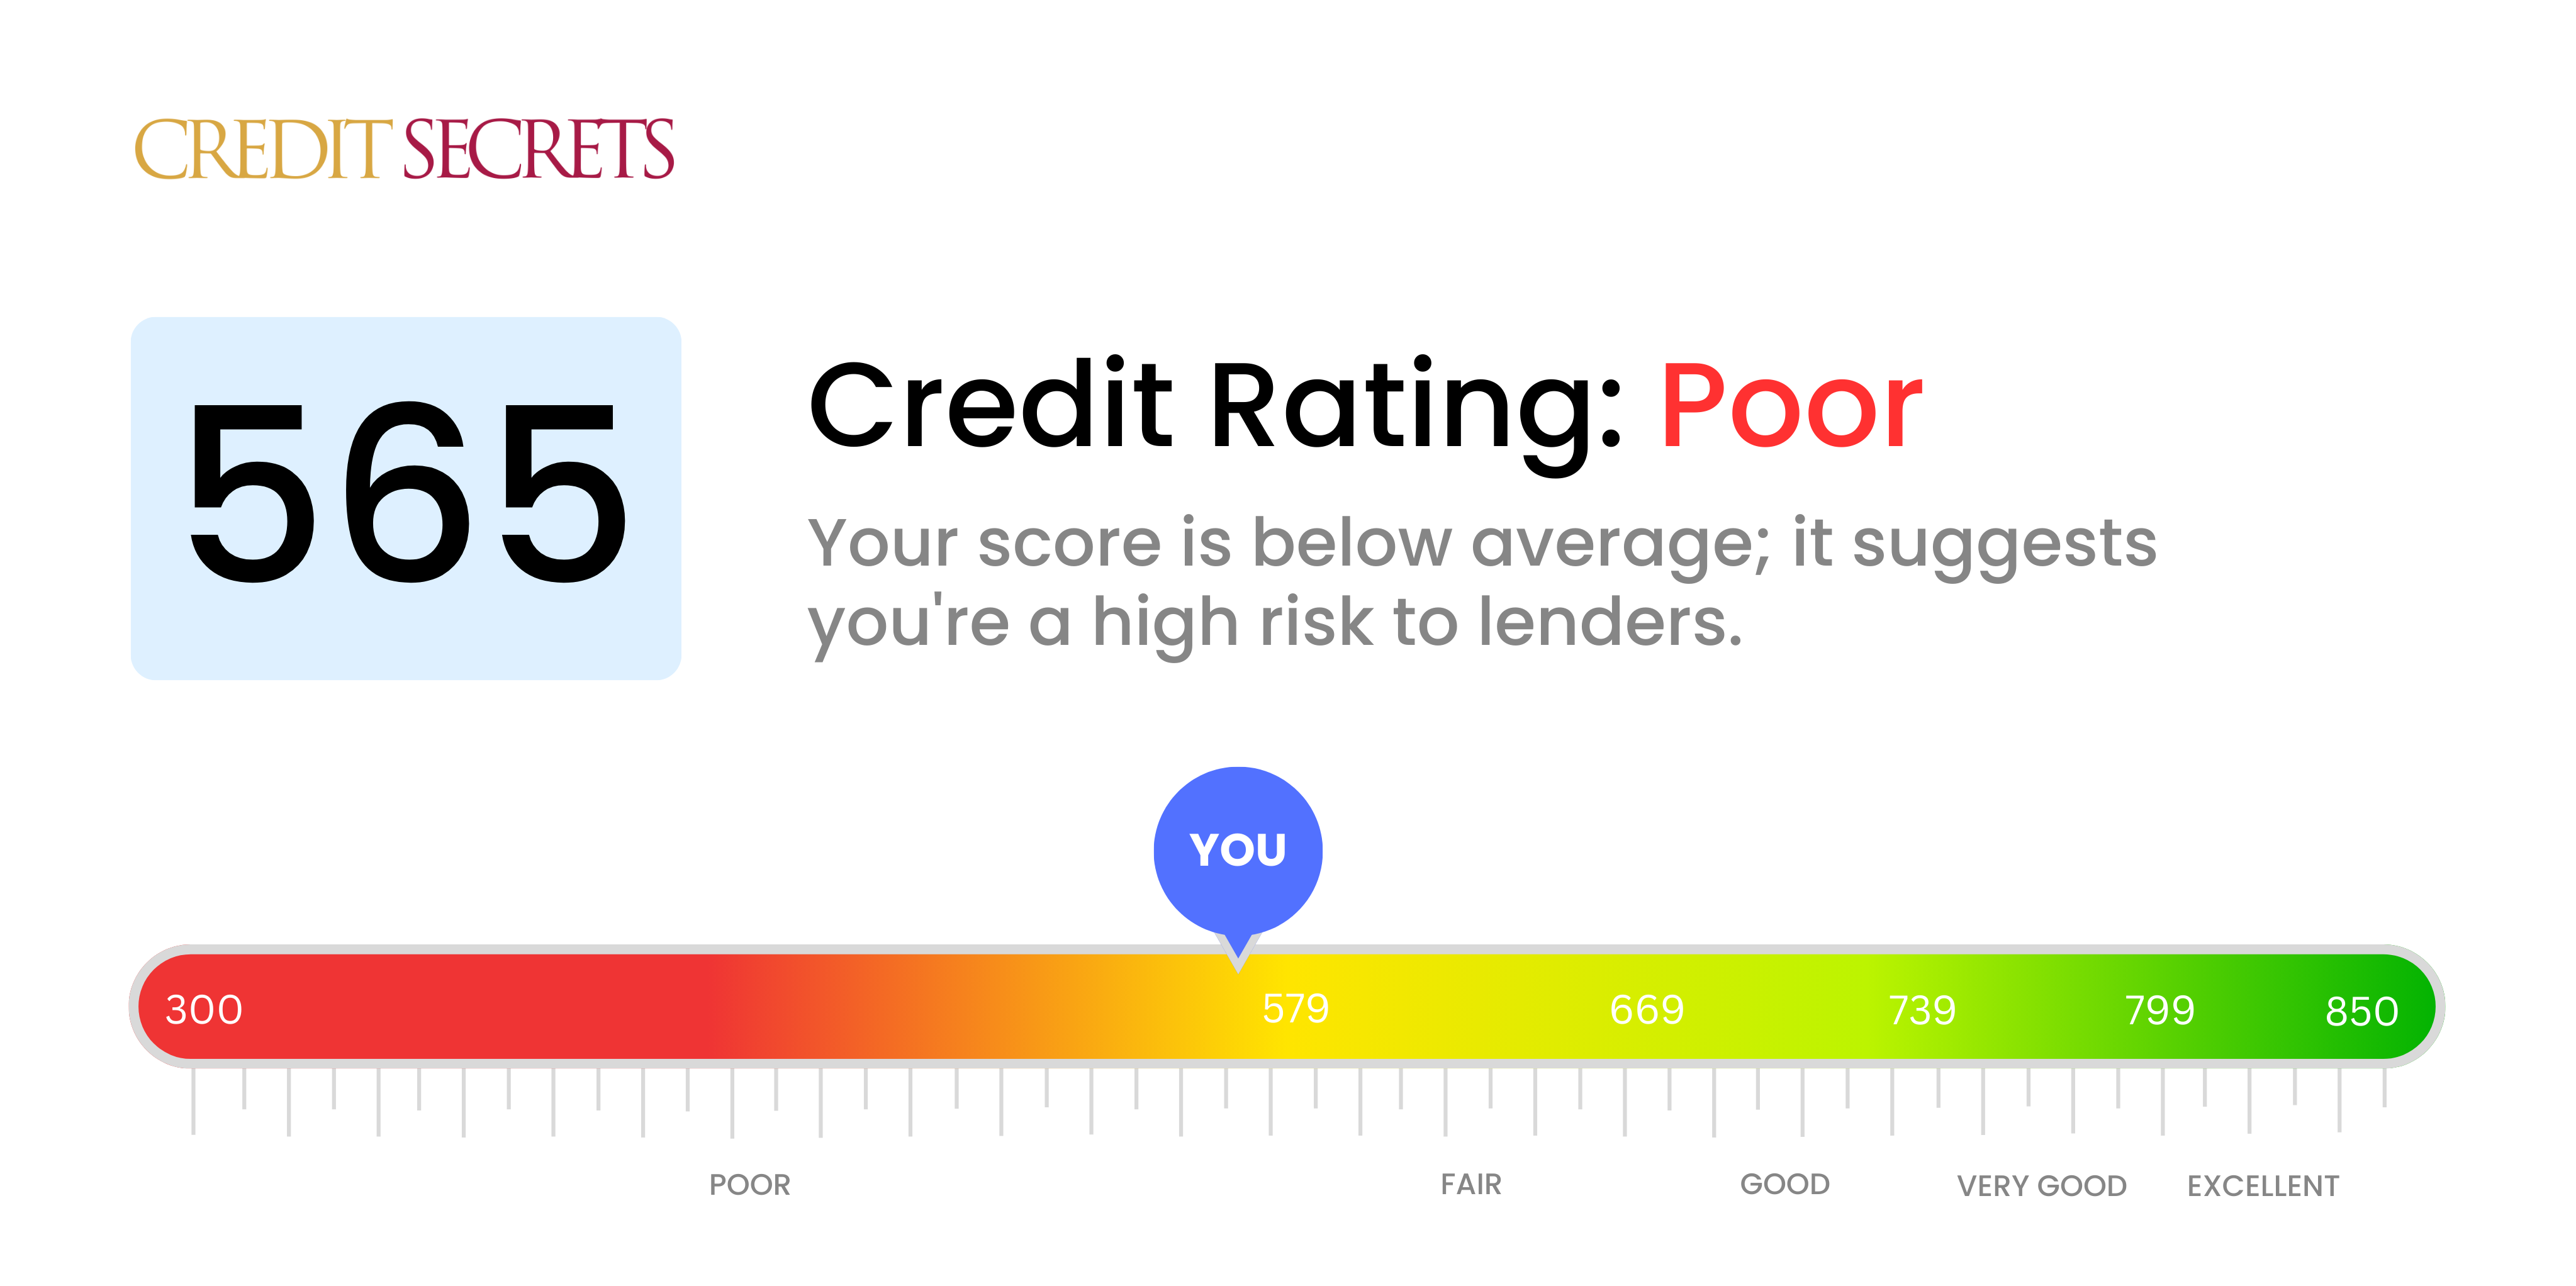 Is 565 a good credit score?